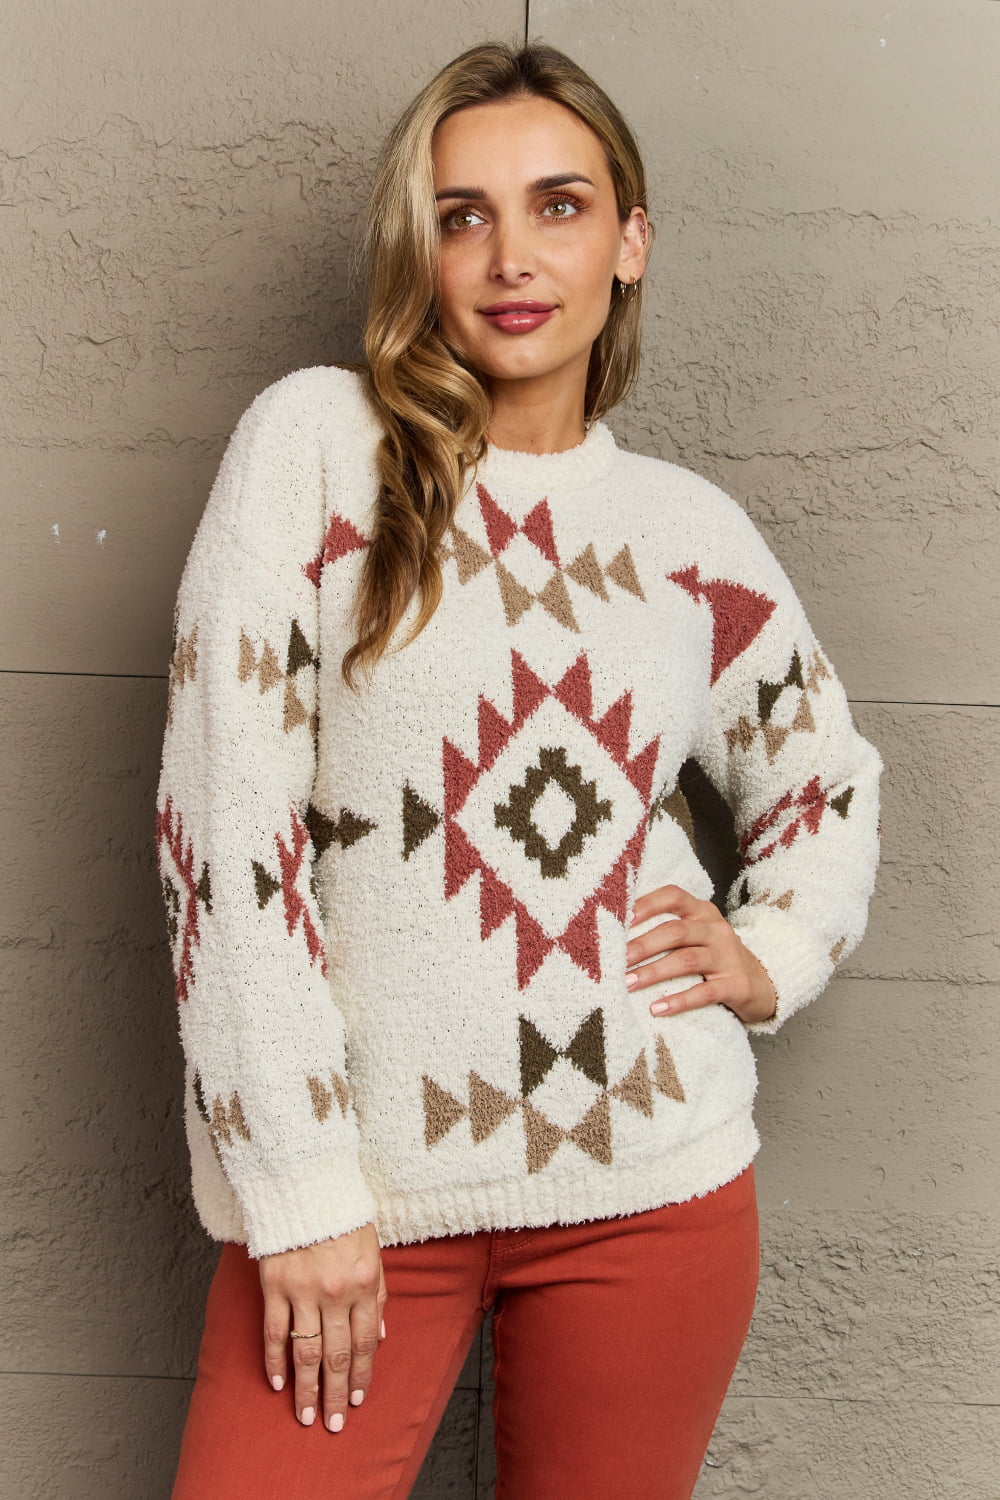 Aztec Graphic Knit Soft Cozy Vintage Inspired Sweater Cardigan 